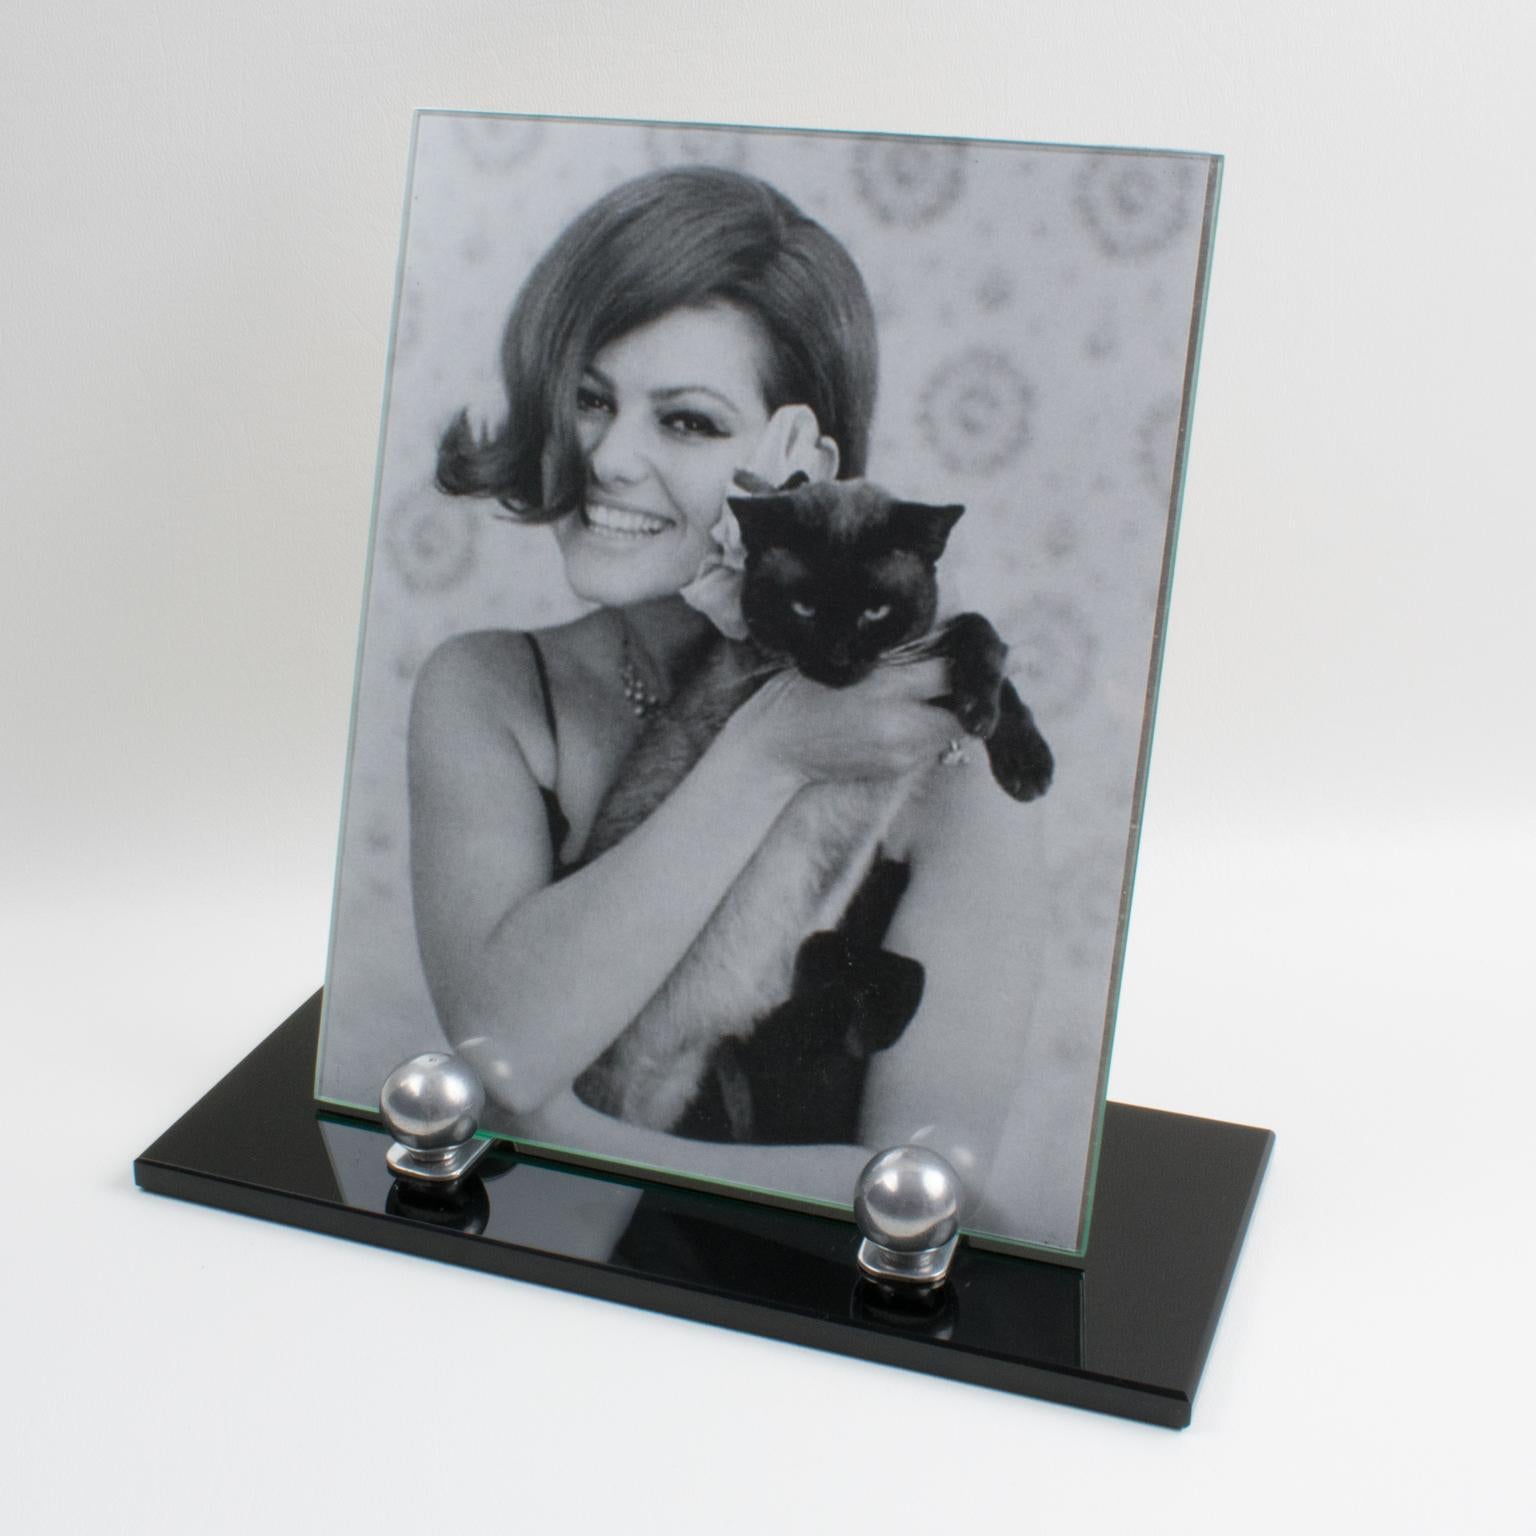 This lovely French Art Deco picture photo frame features a thick black opaline glass plinth complimented with two polished aluminum metal holders and aluminum bead accents. The frame has a glass sheet on the front and an aluminum sheet at the back